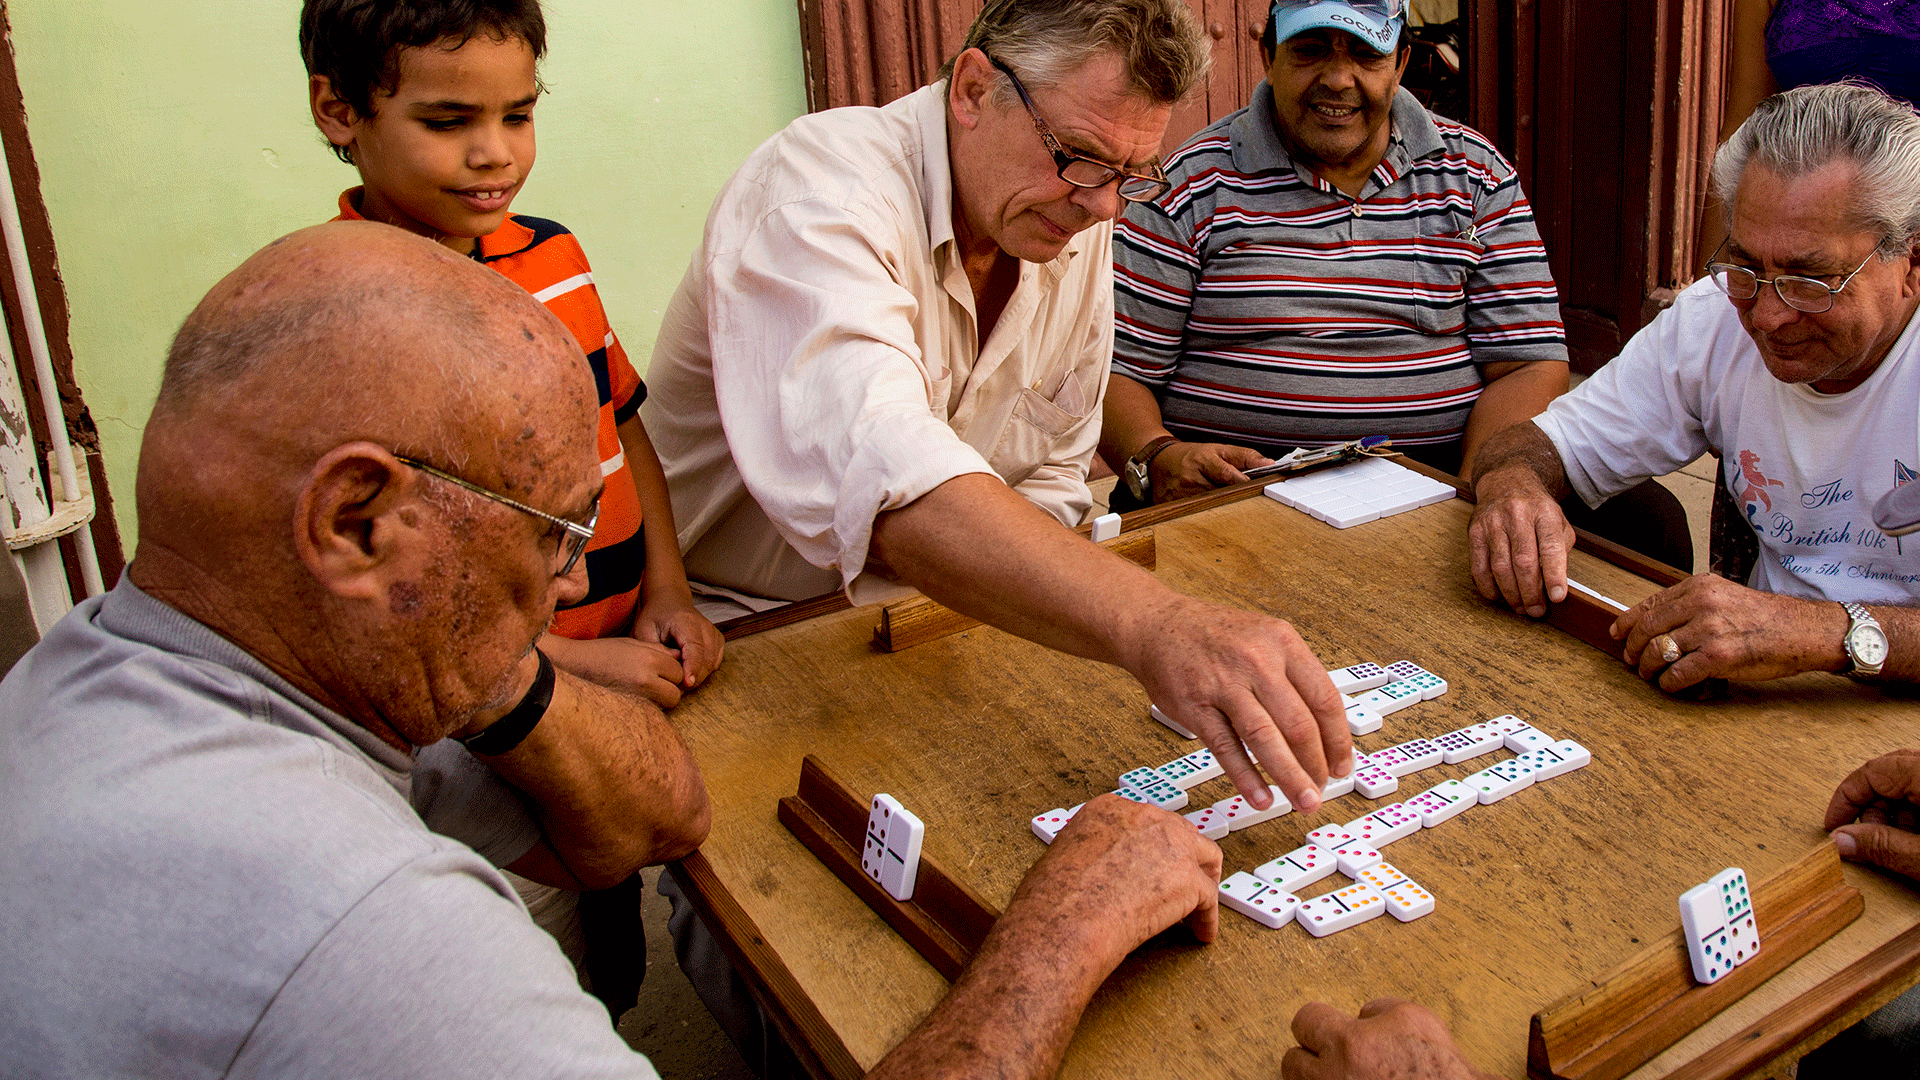 Local Cuban people playing dominoes